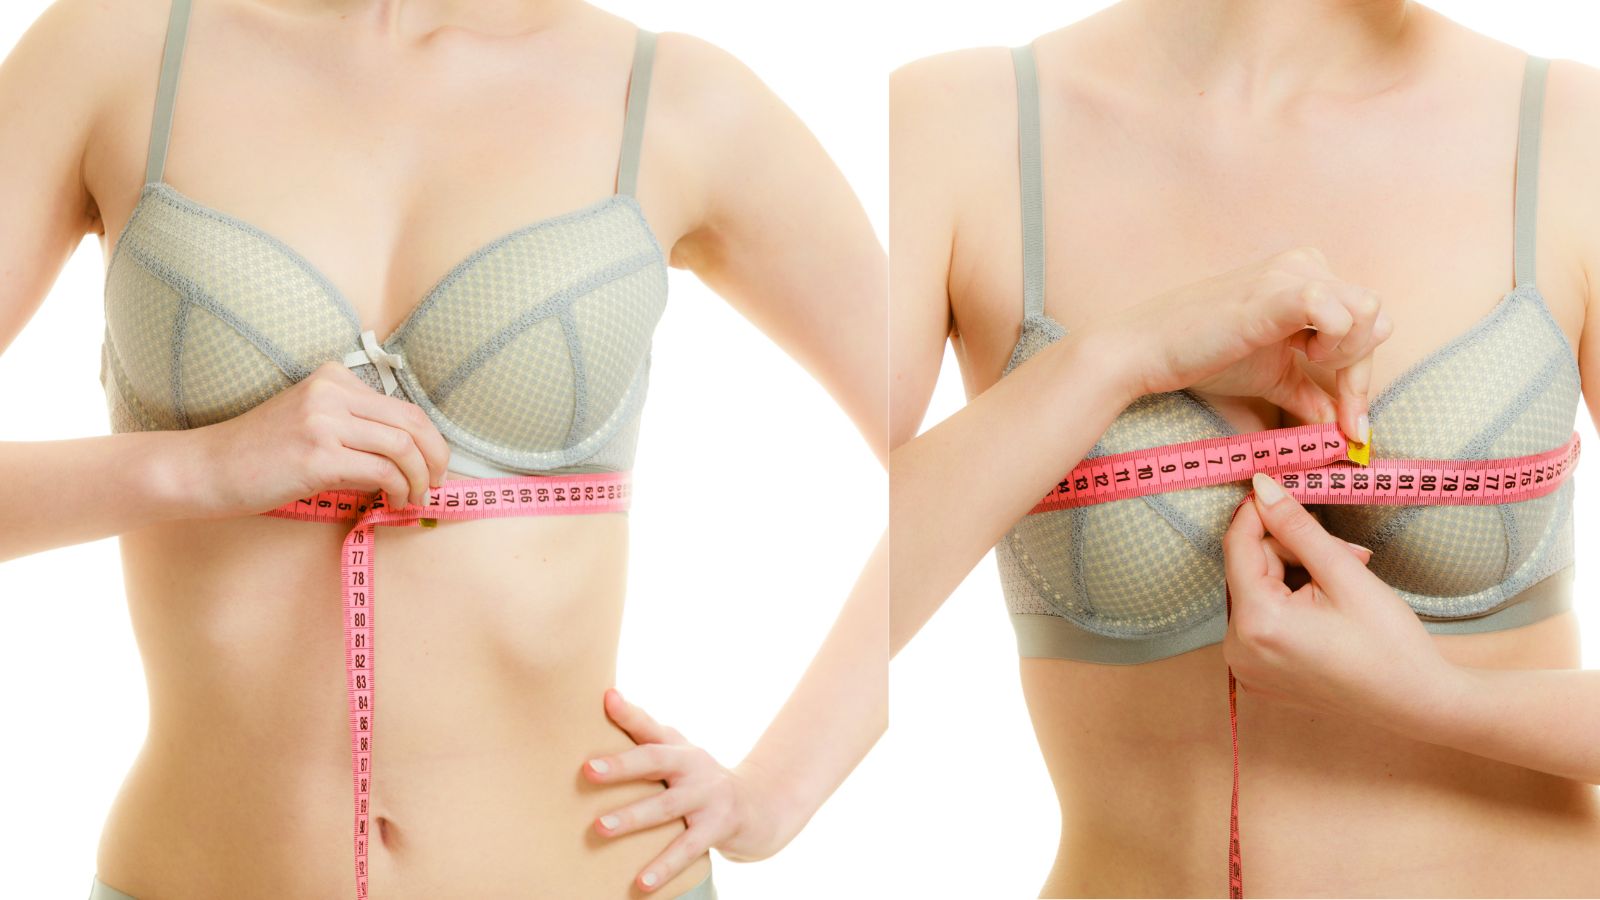 How To Measure Bra Size At Home A Simple 4 Step Guide Woman And Home 